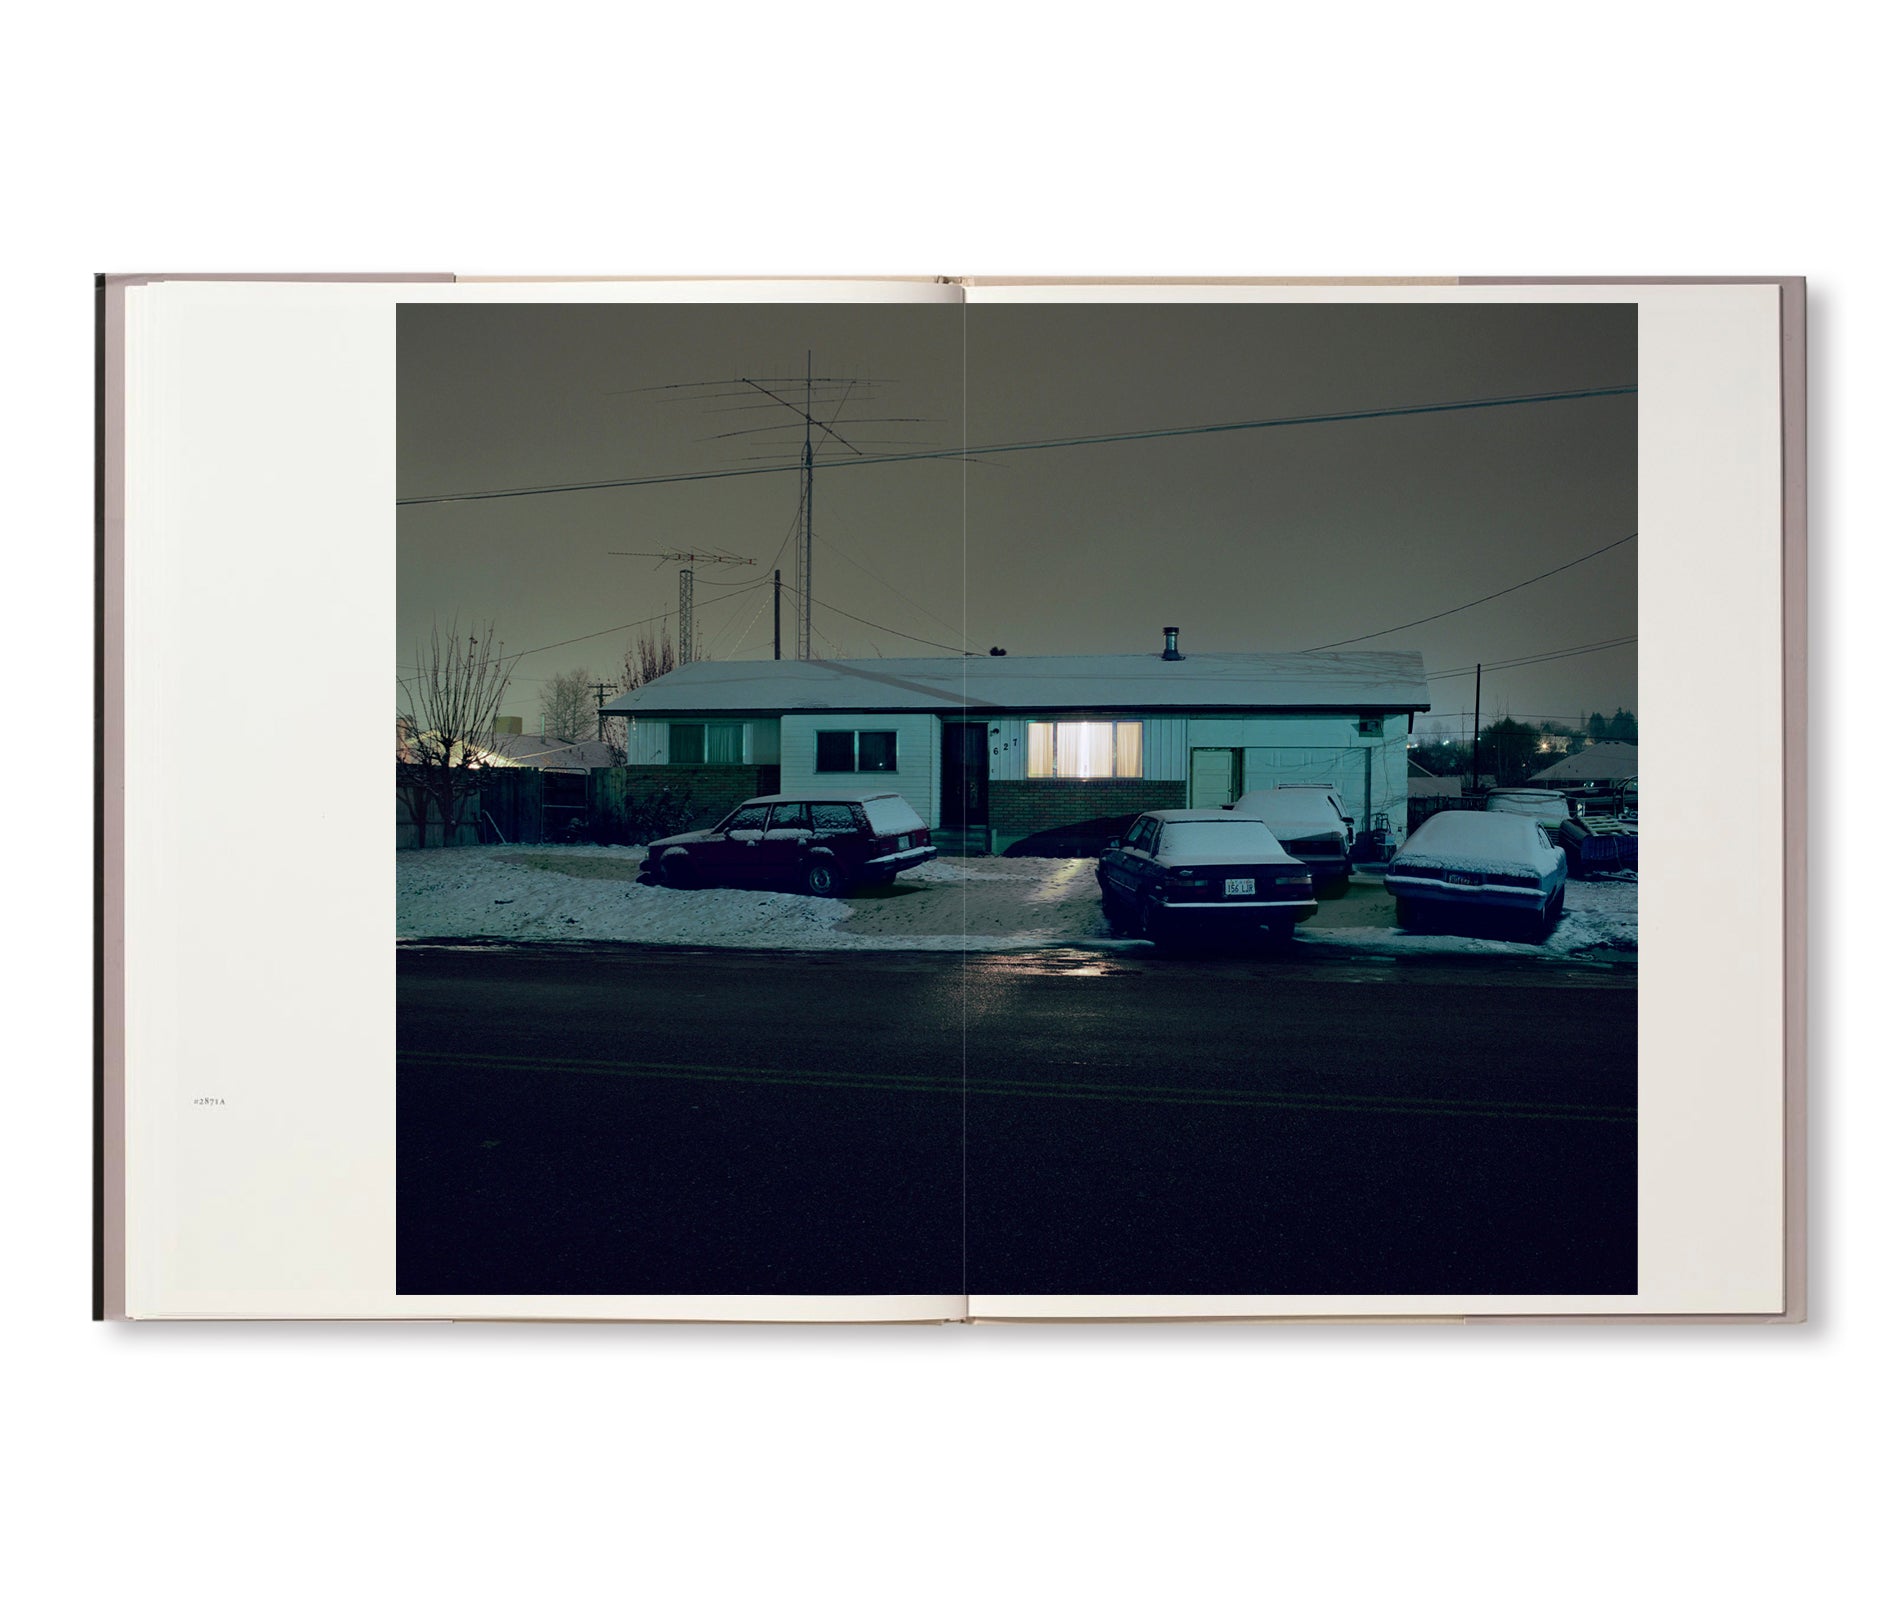 OUTSKIRTS by Todd Hido [SPECIAL EDITION]